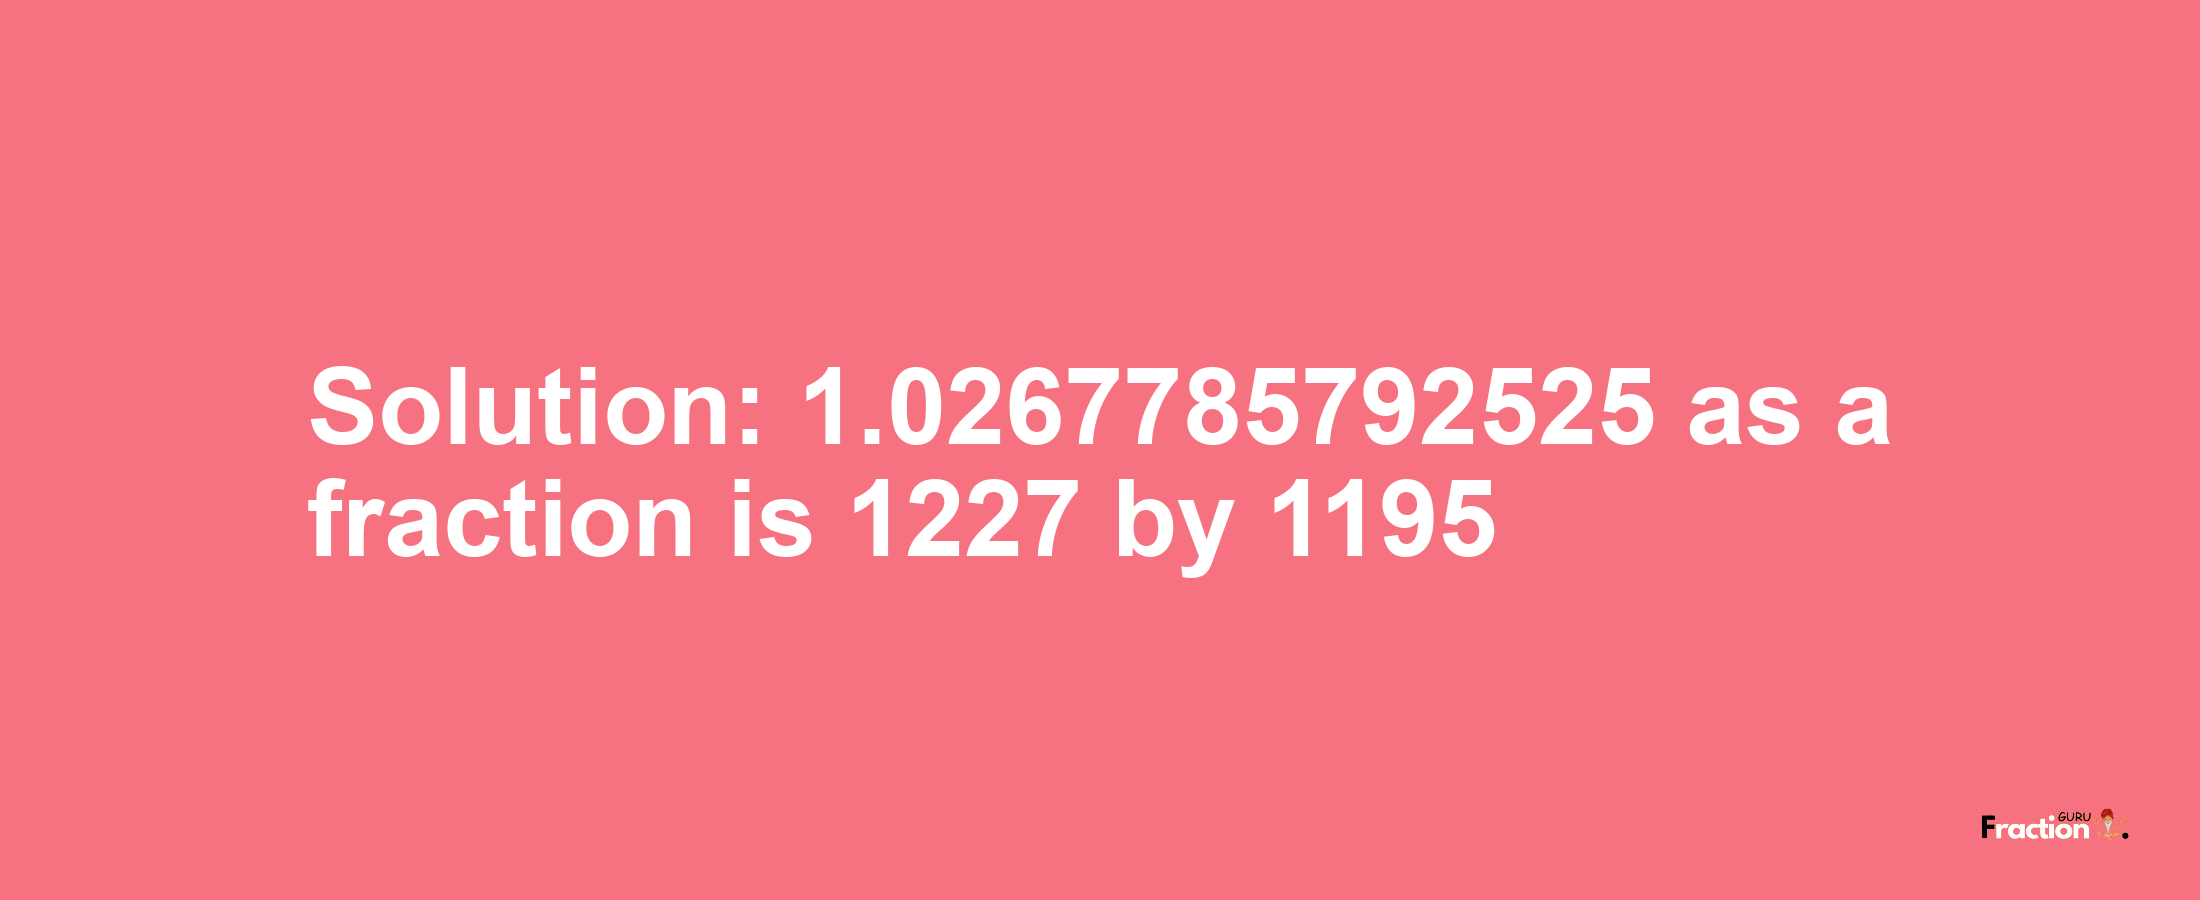 Solution:1.0267785792525 as a fraction is 1227/1195